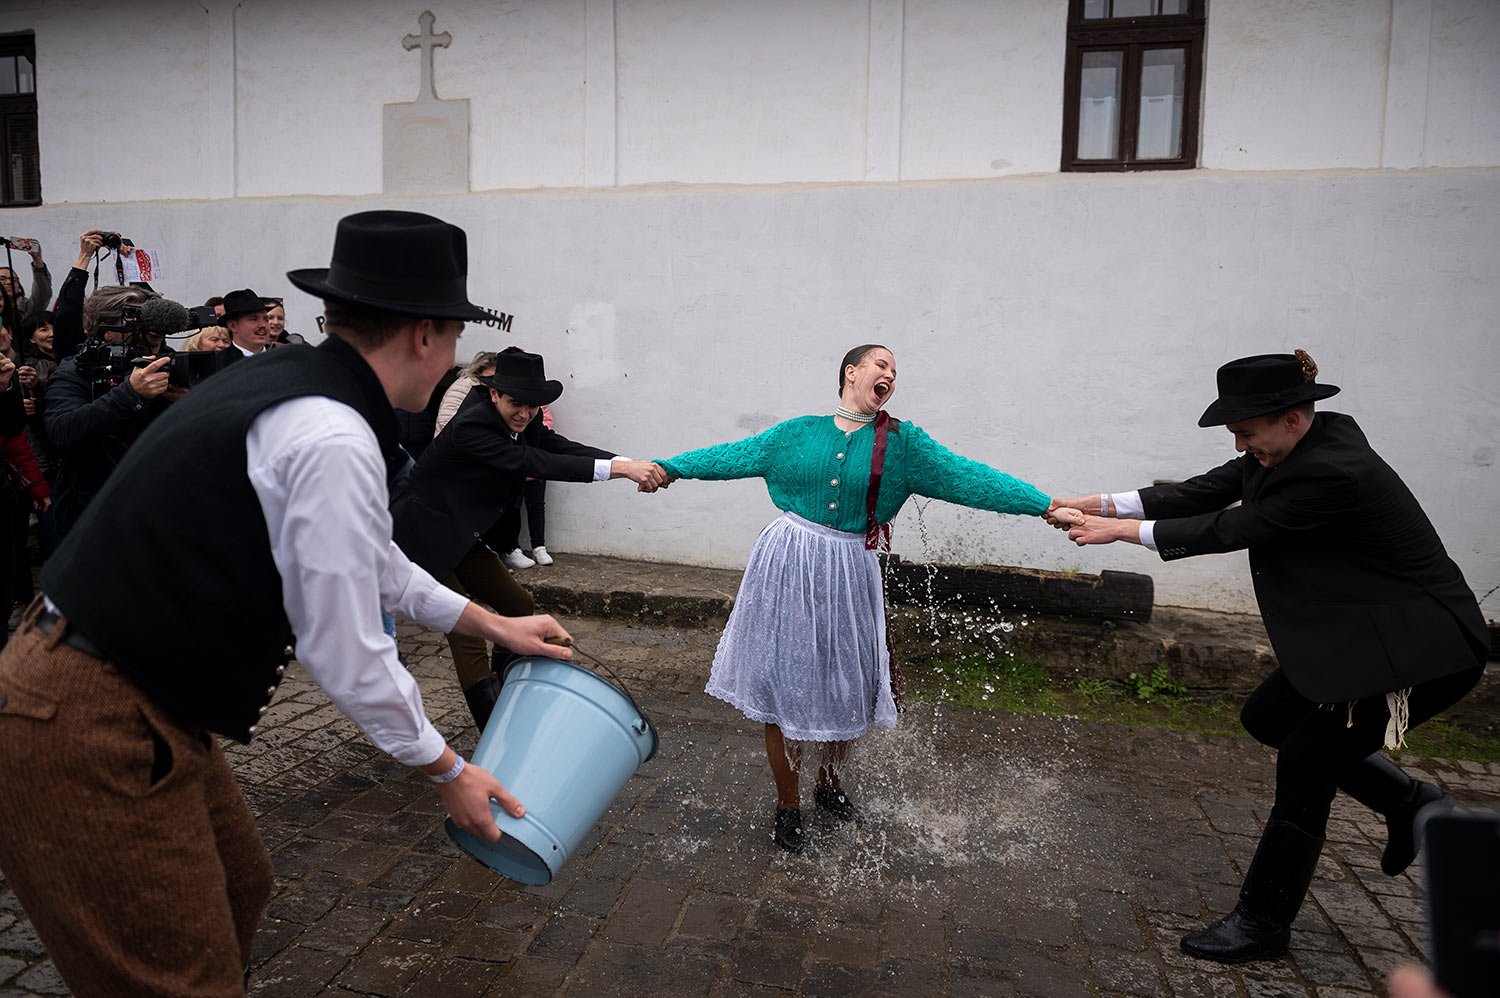  Hungarian men wearing folk costumes pour water onto women during a traditional a Easter Monday celebration in Holloko, Hungary, Monday, April 10, 2023. (AP Photo/Denes Erdos) 